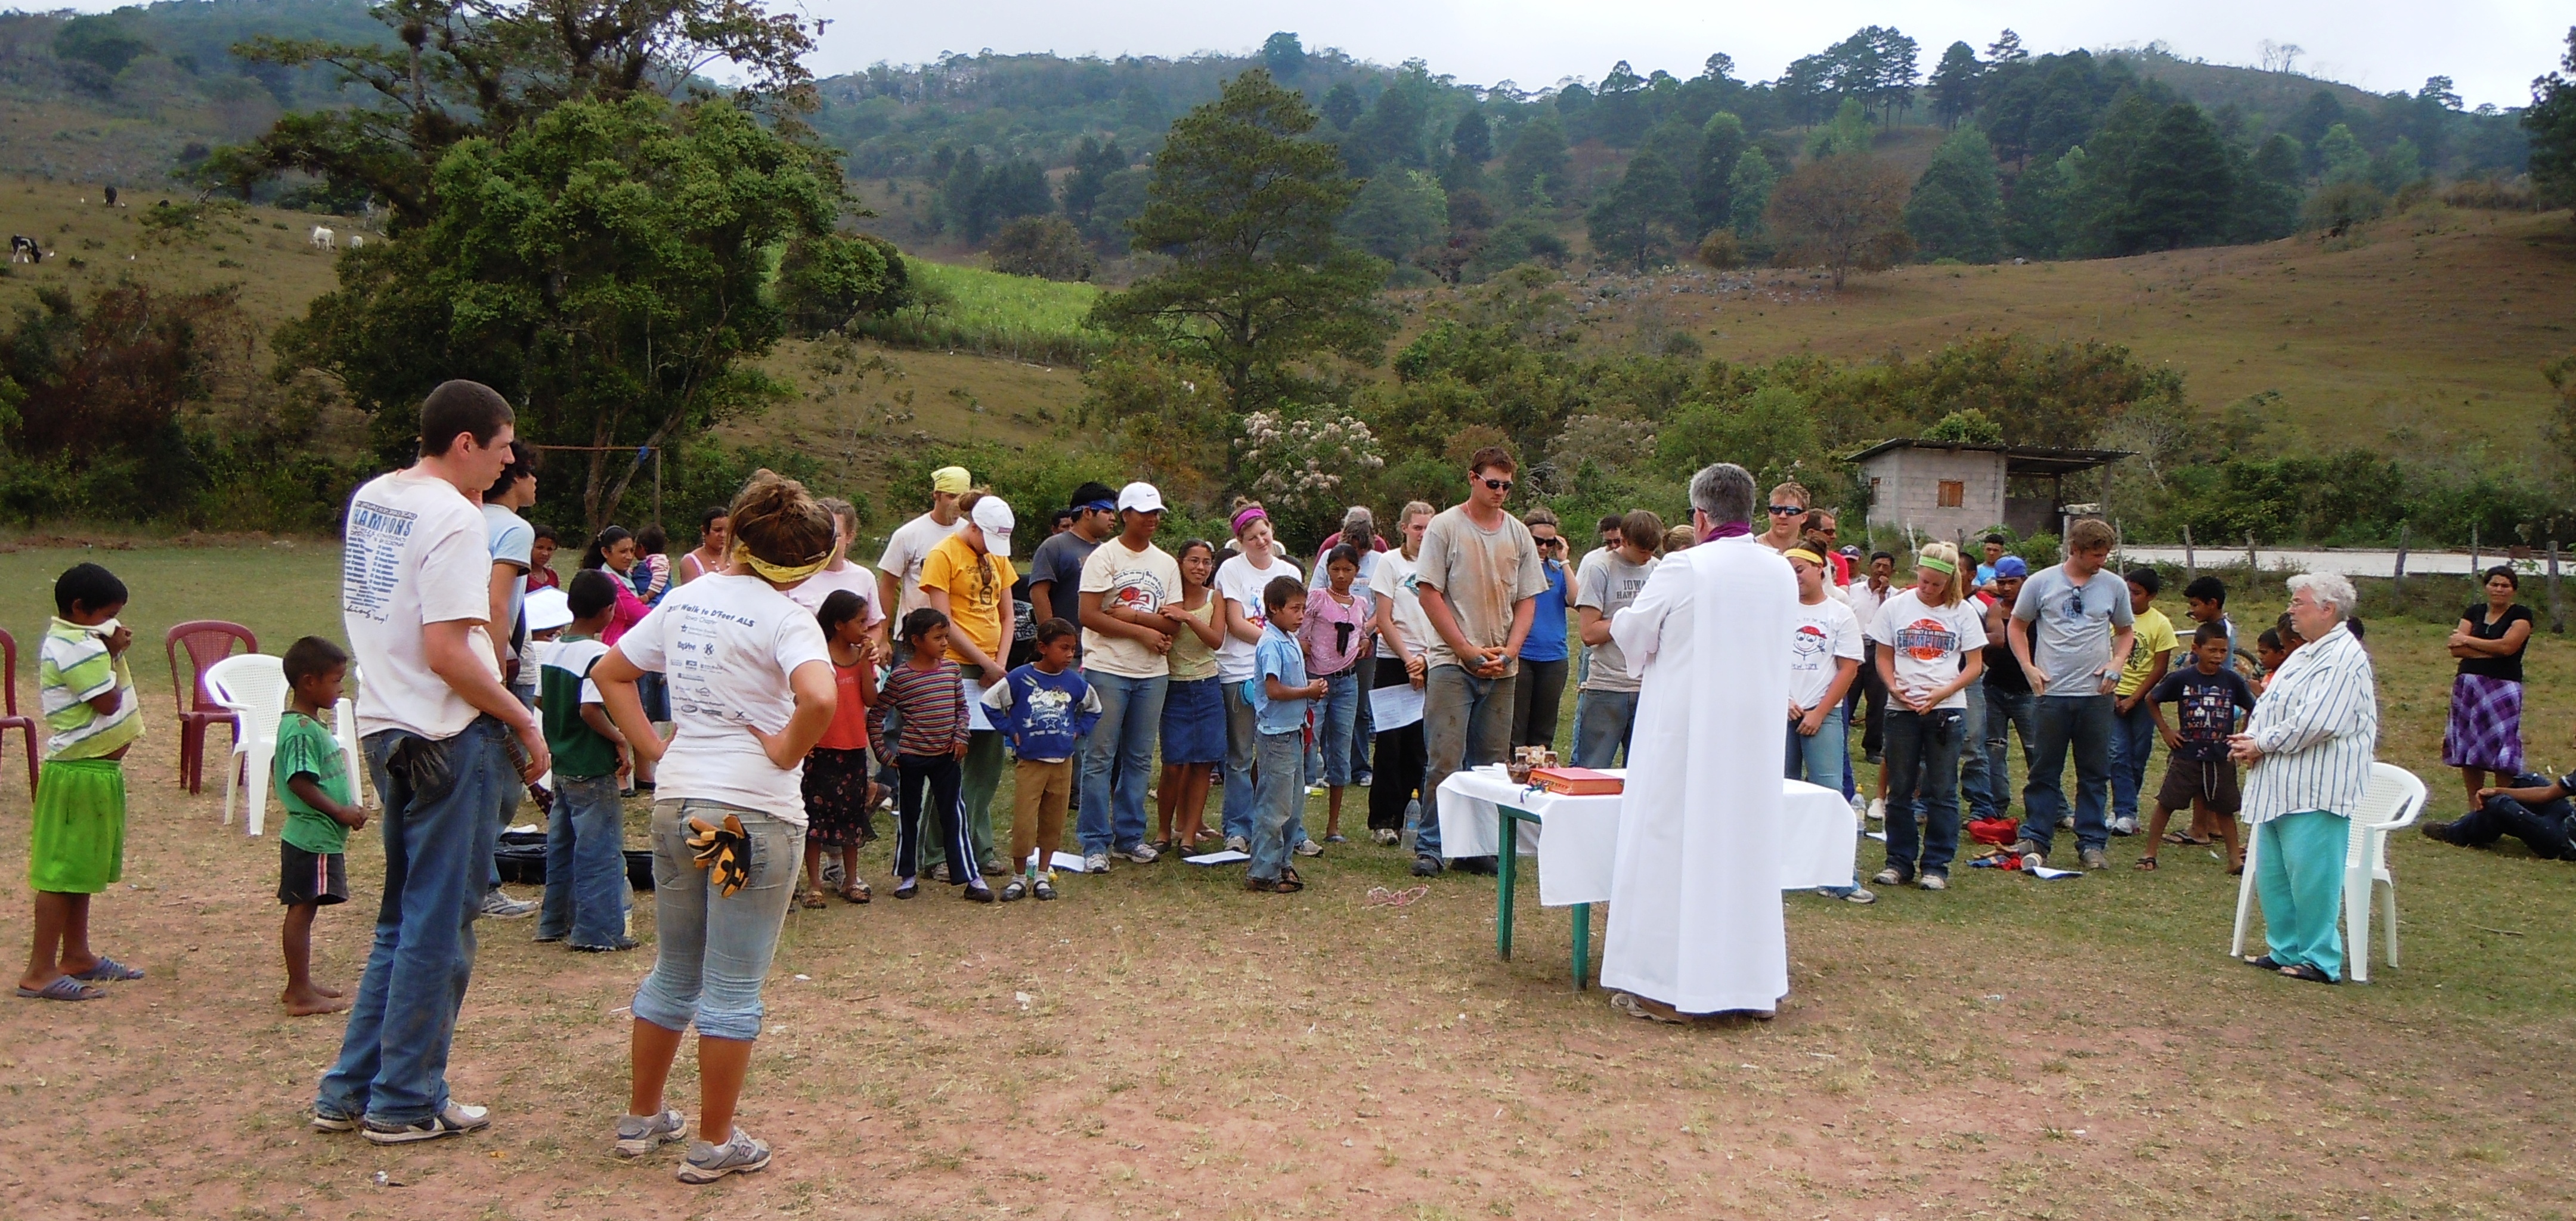 Missioners & villagers celebrate outdoor mass in La Florida